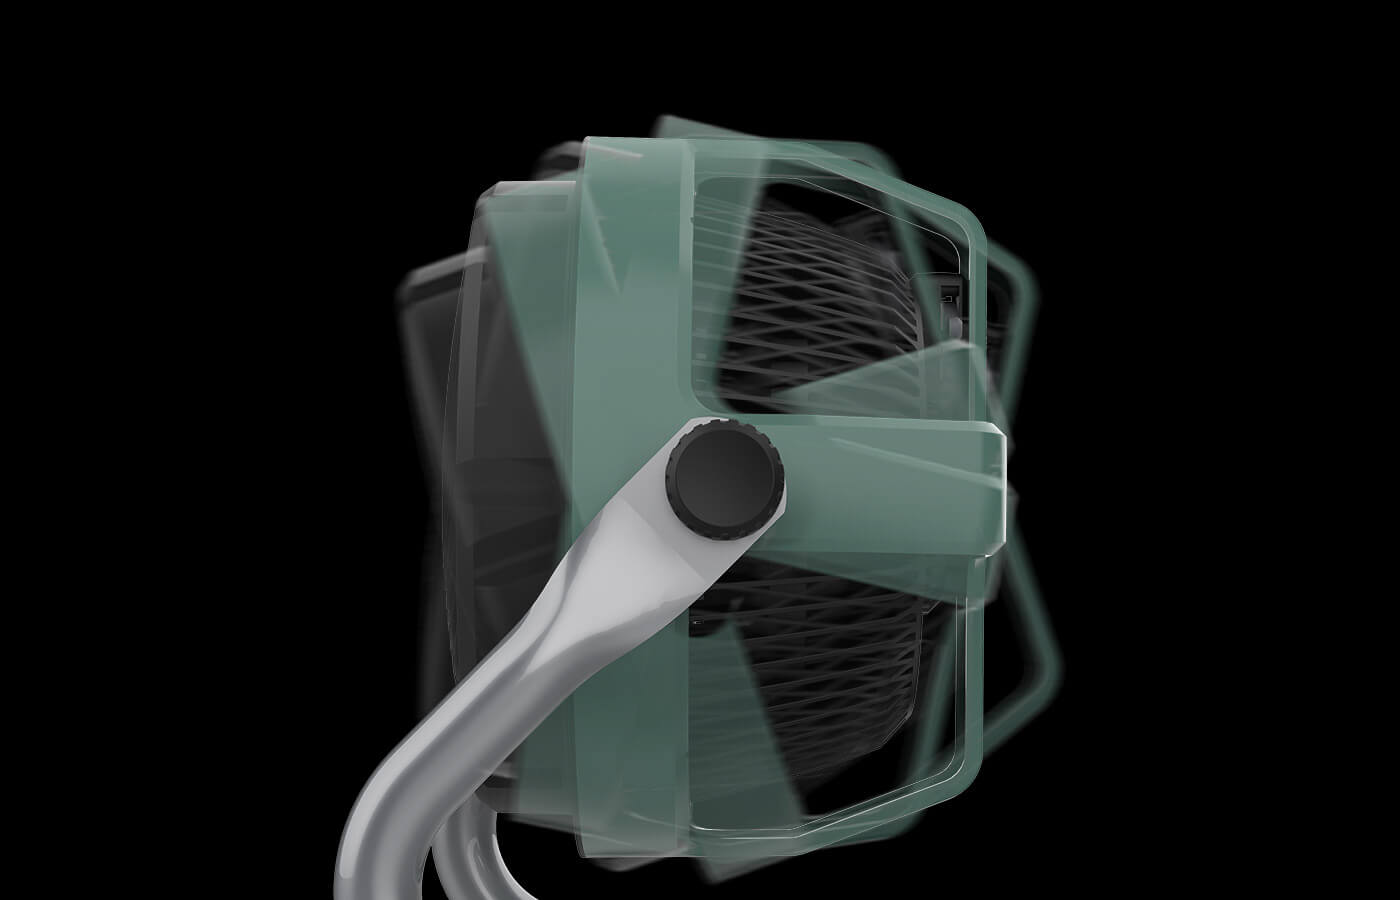 a still image showing EXO61 HD fan angle adjustment. The image shows the fan overlayed at different angles.